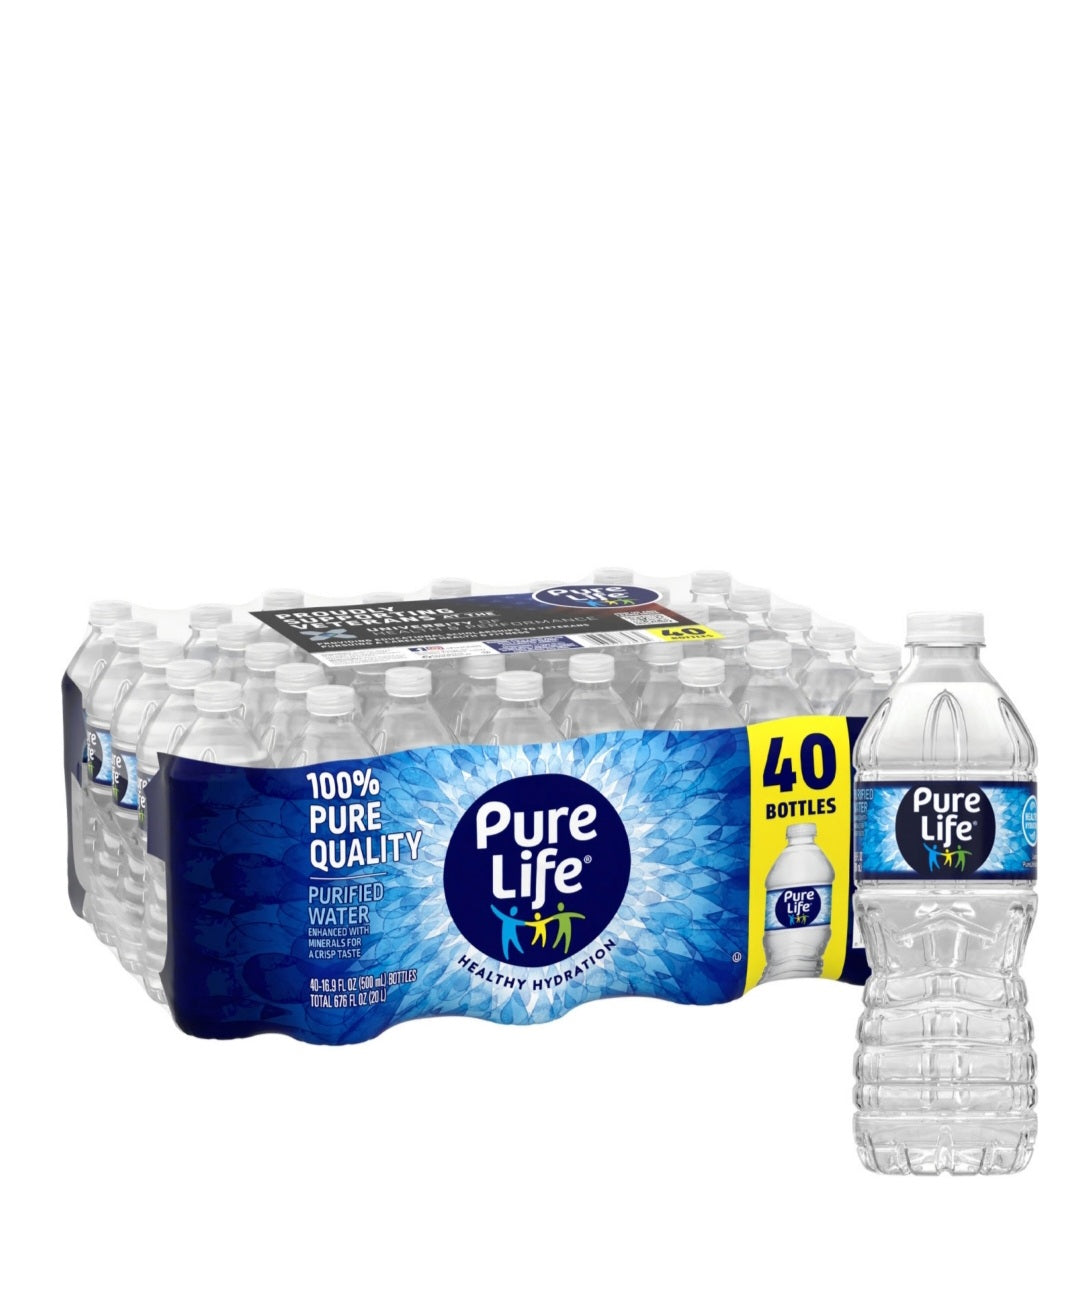 Nestle Pure Life Purified Water (Full Pallet)